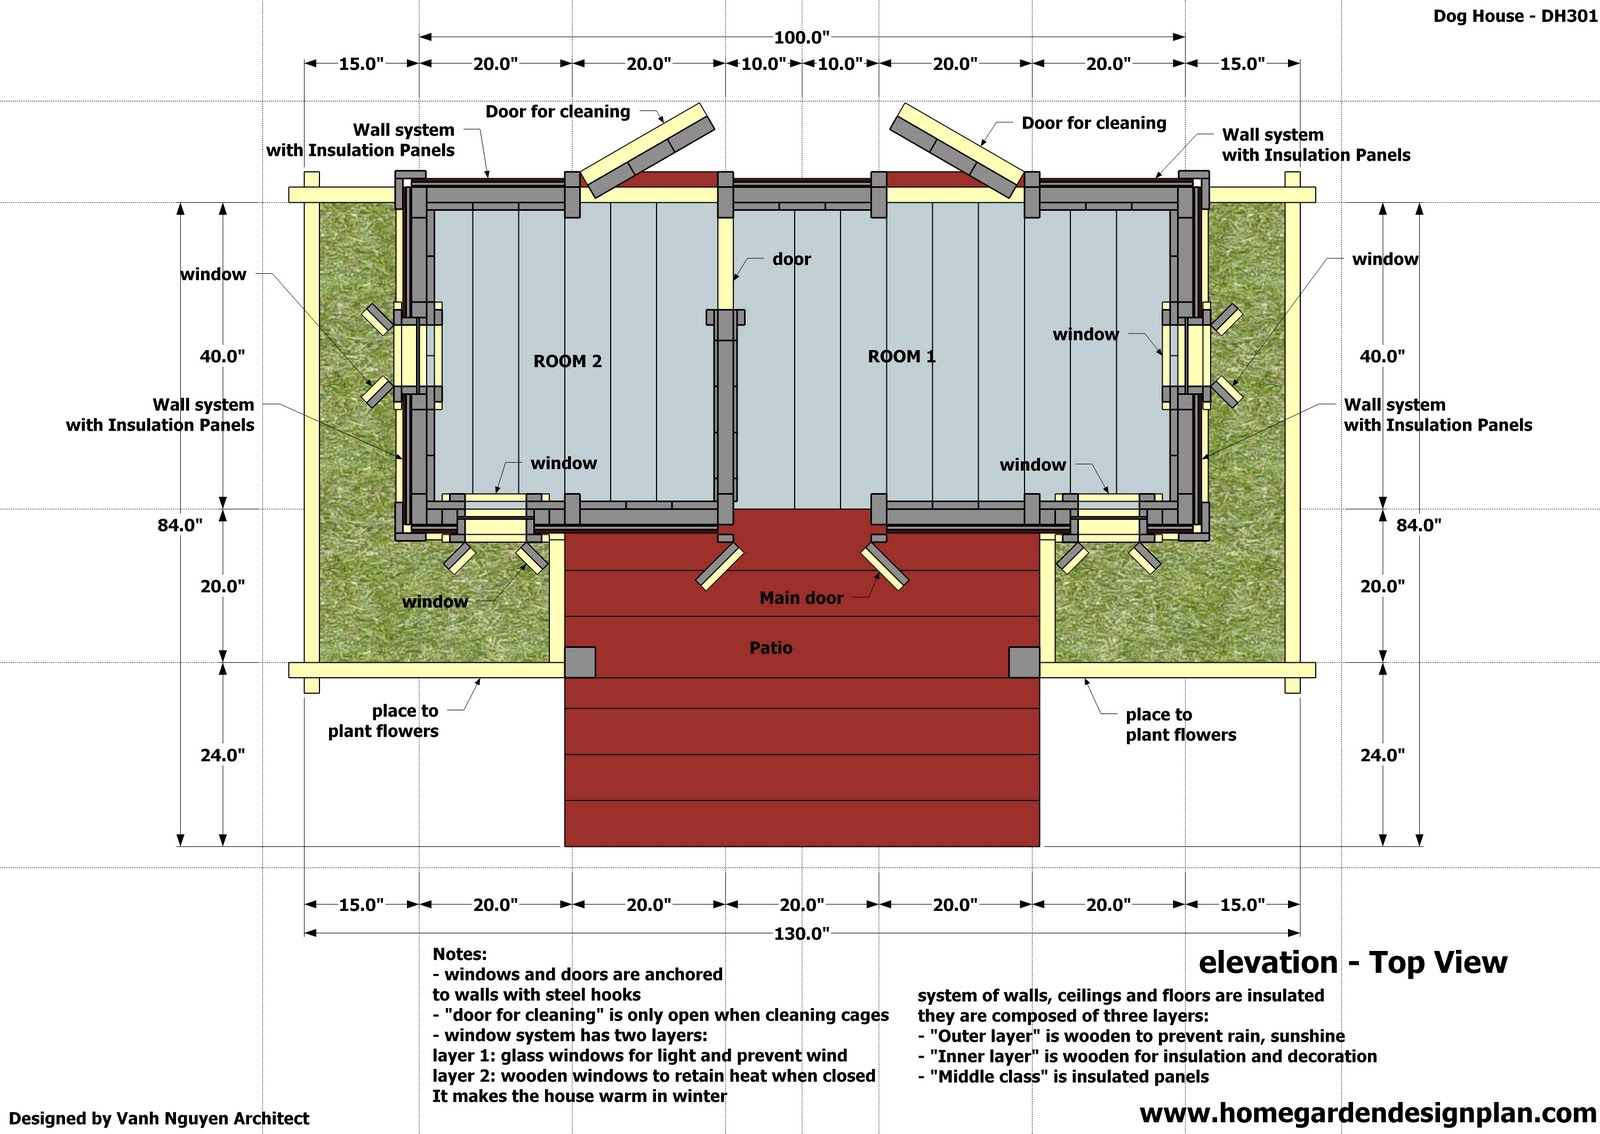 Insulated Dog House Plans